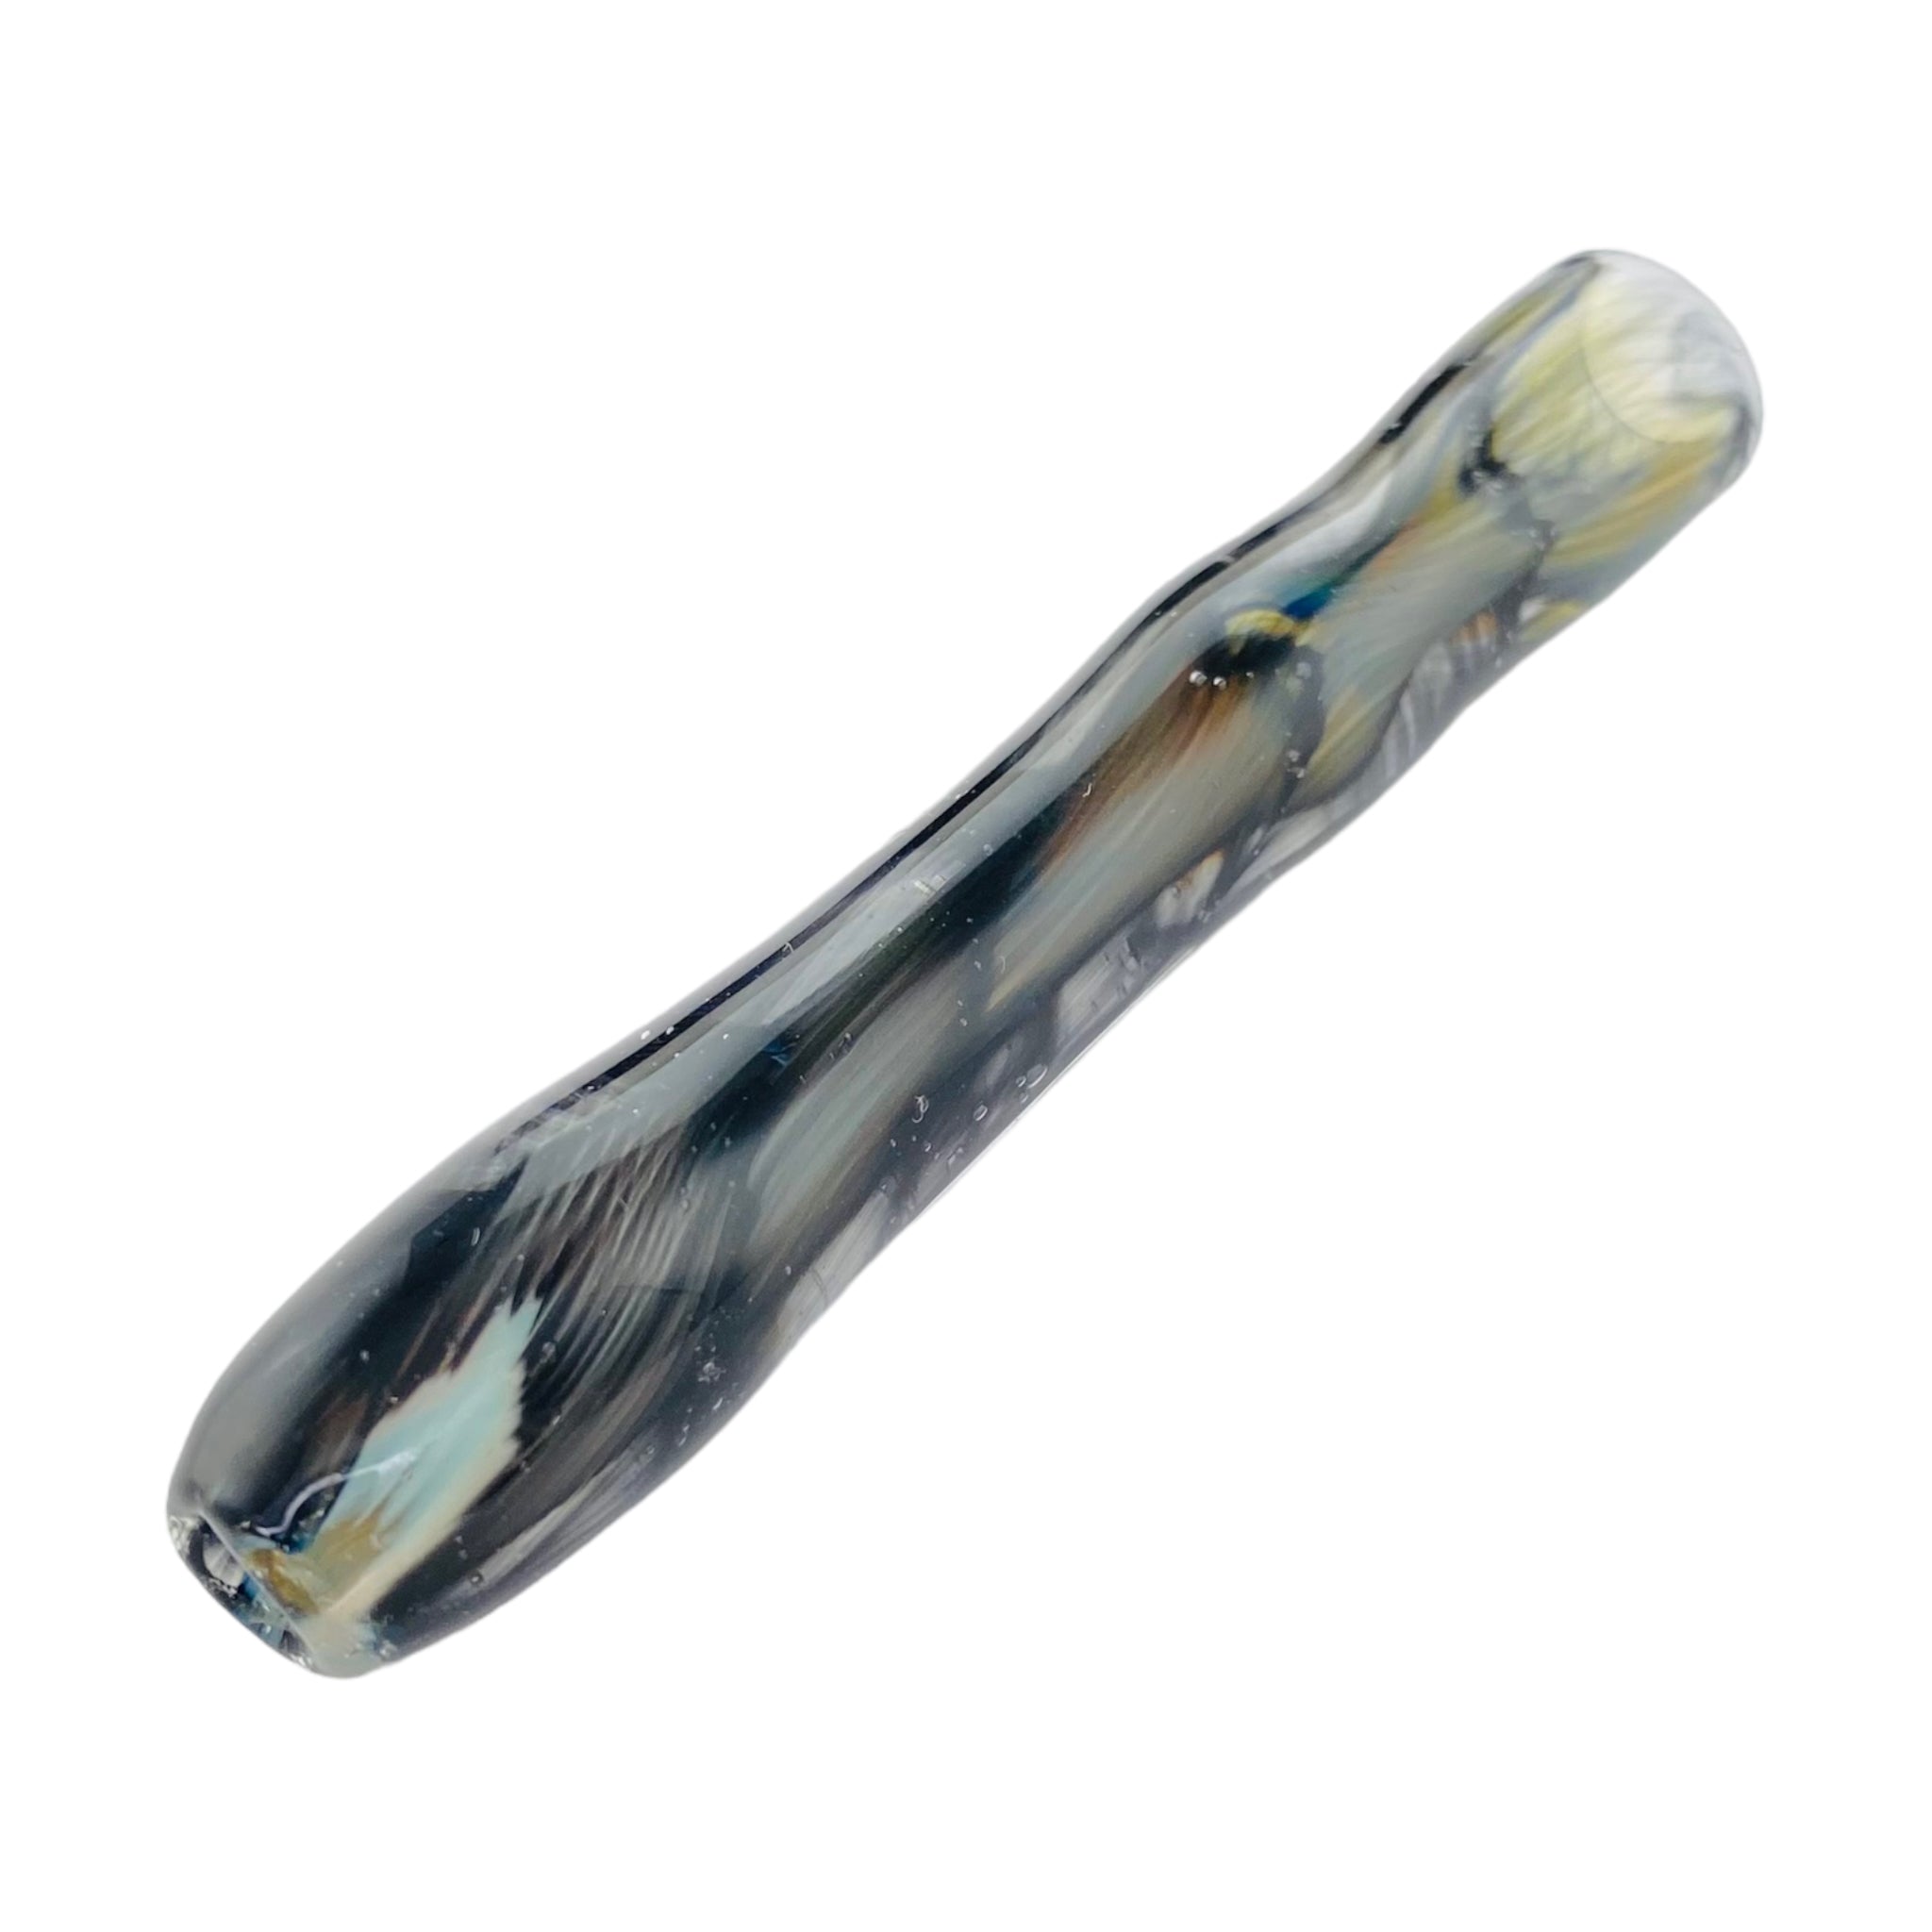 Glass Chillum Pipe - Black Inside Out Glass One Hitter